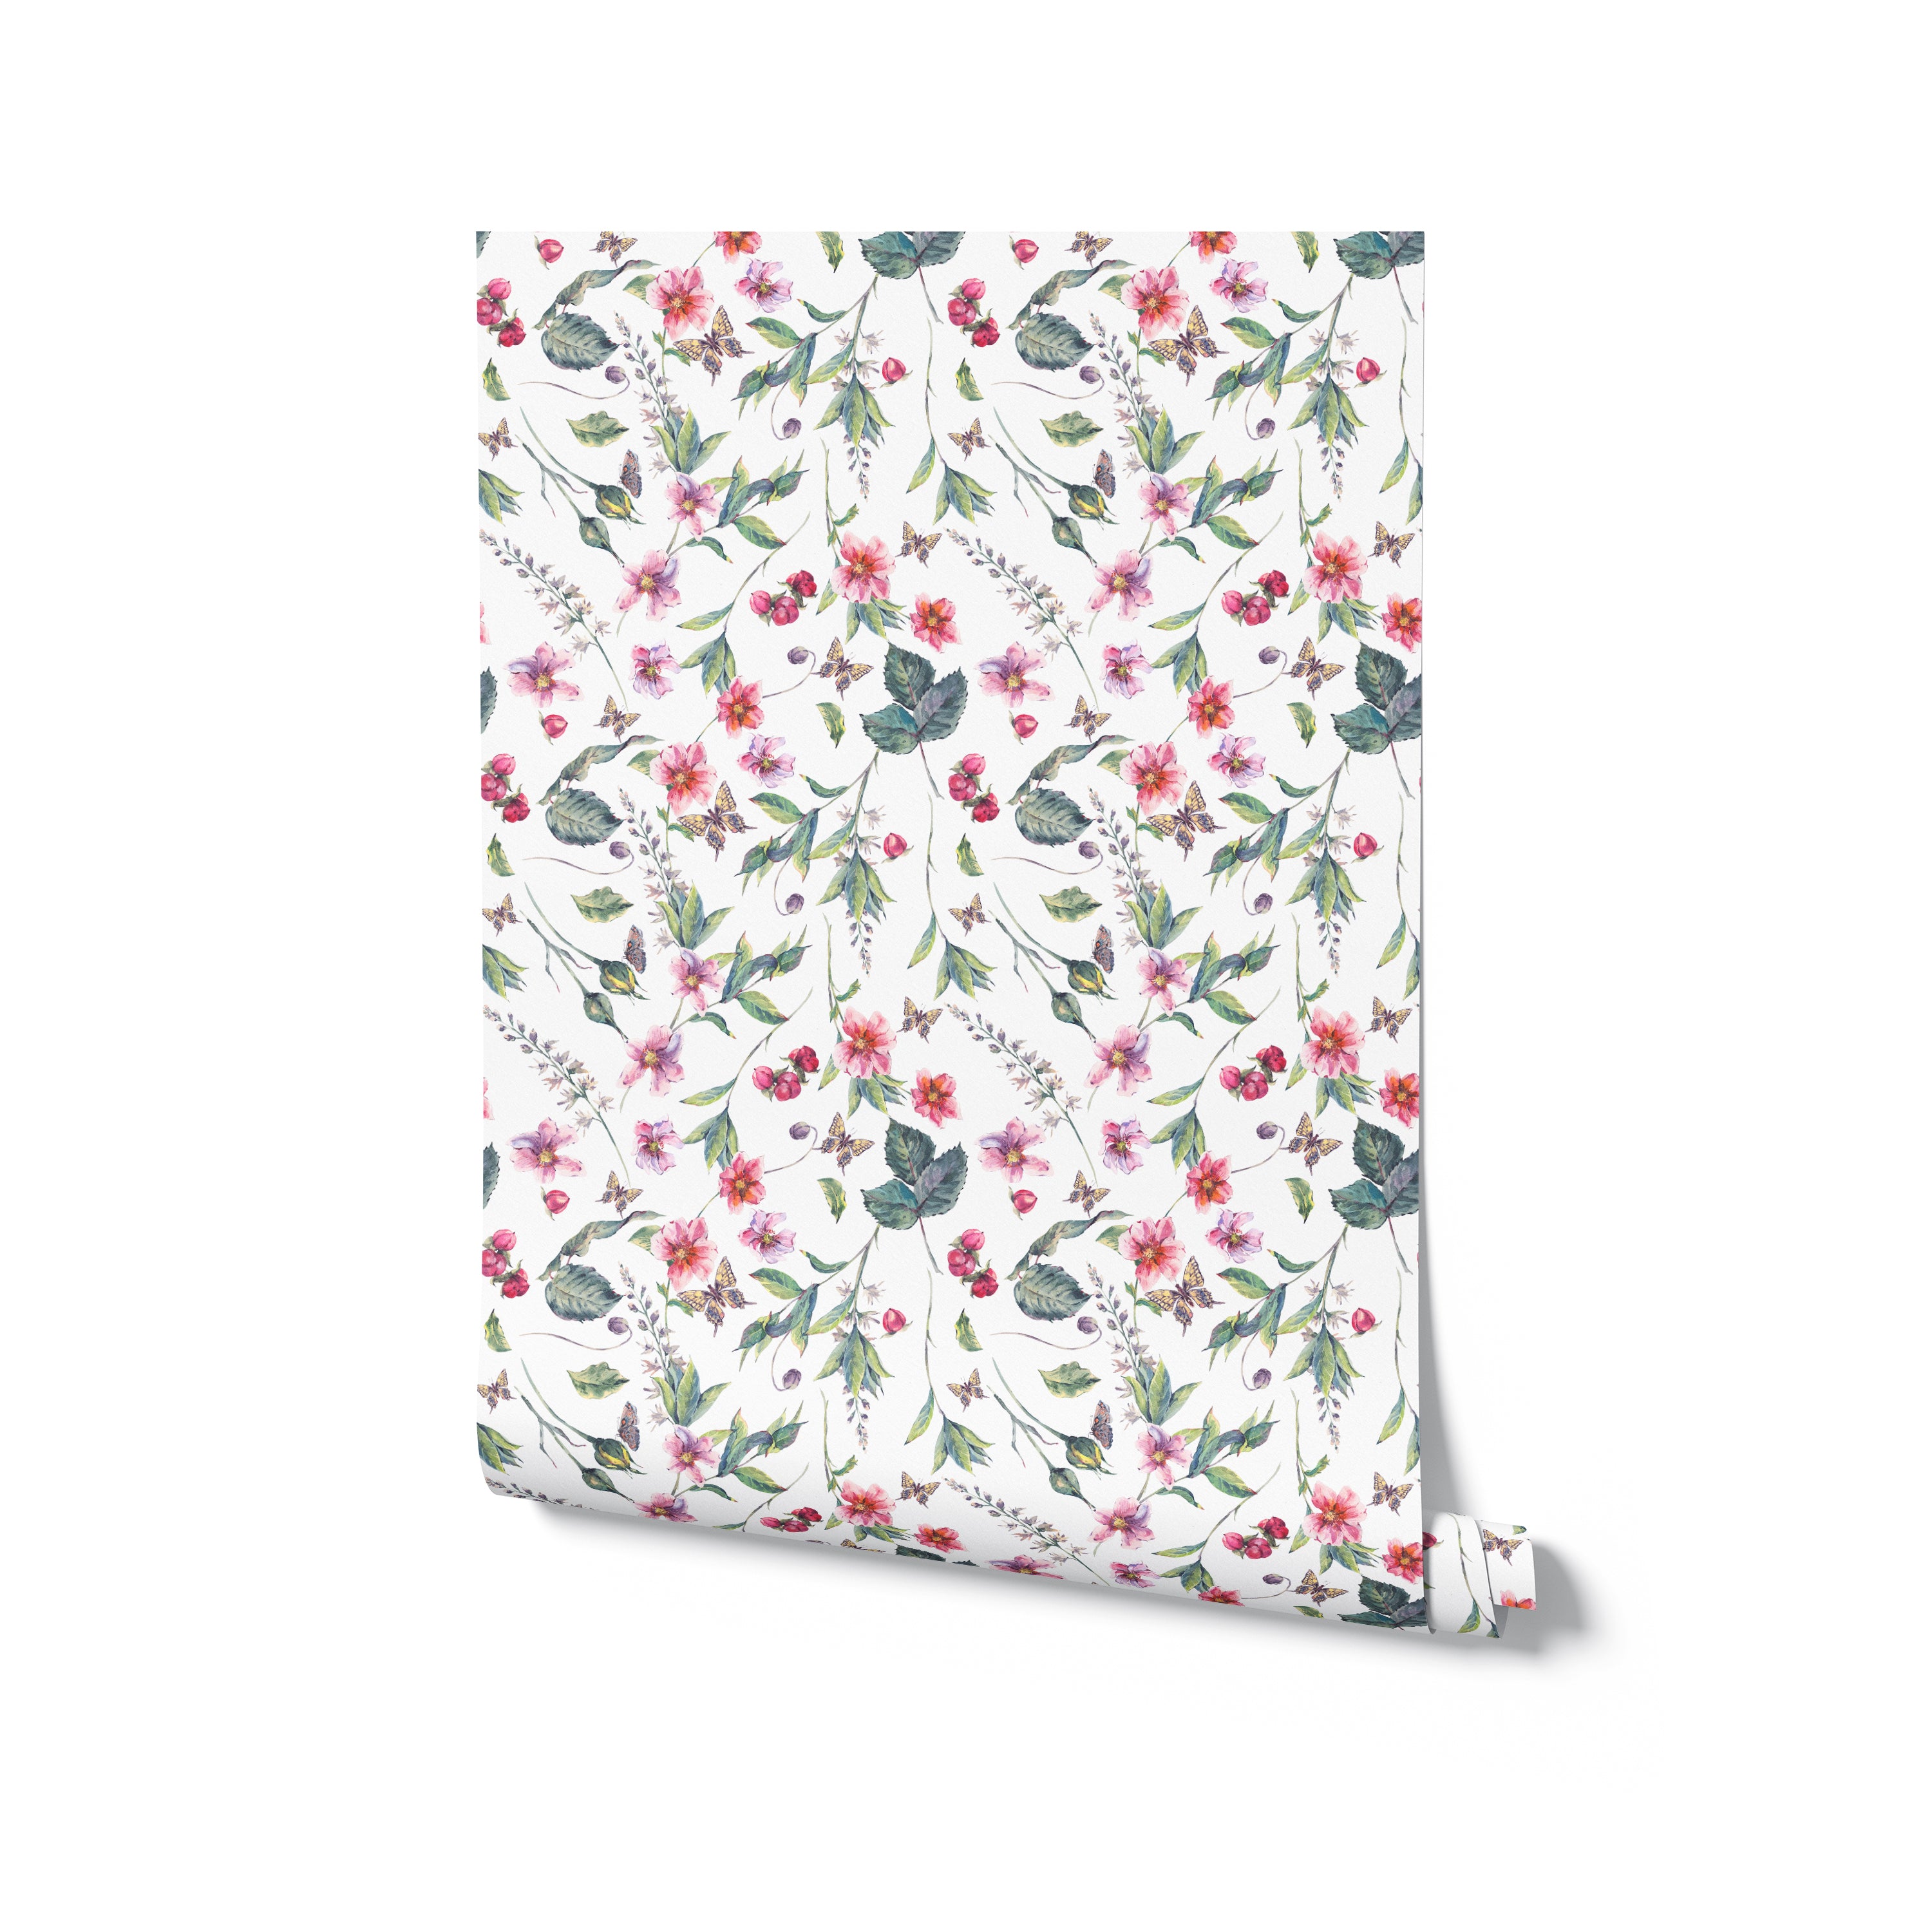 A rolled-up piece of Graceful Garden Wallpaper, revealing a lush pattern of pink and red floral designs with green leaves and delicate butterflies, perfect for adding a touch of nature to any room.